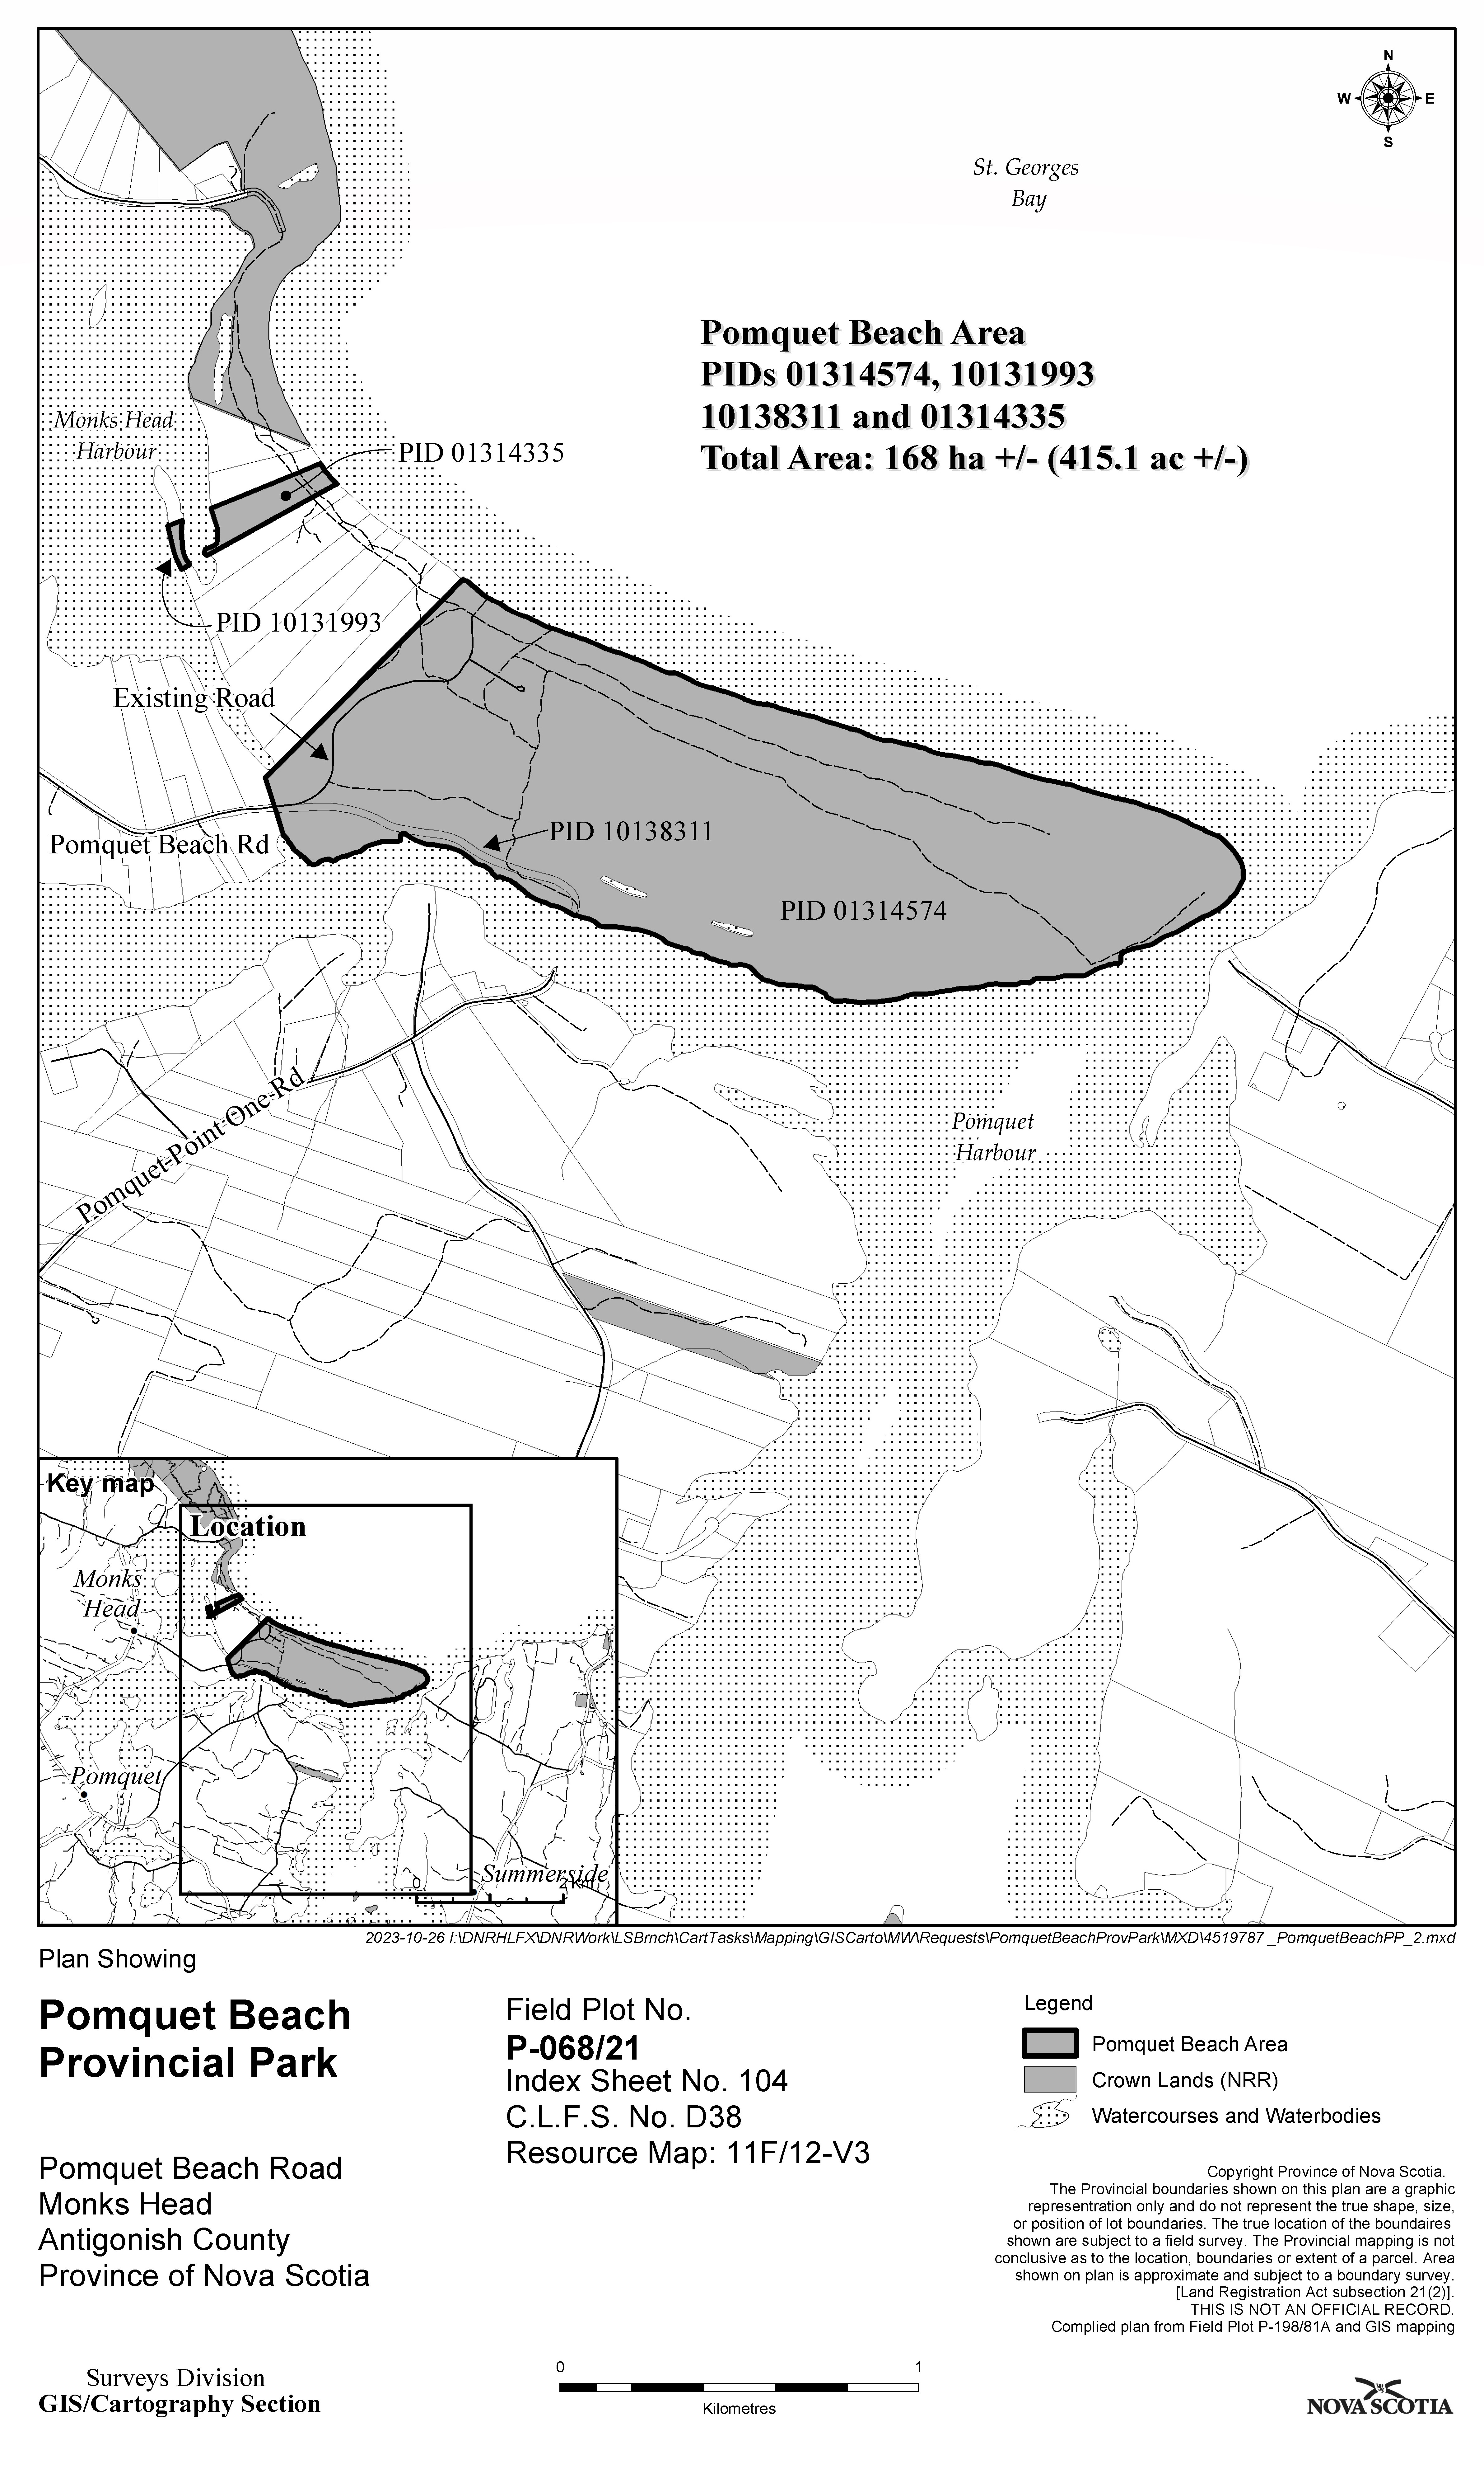 Graphic showing map of Pomquet Beach Provincial Park